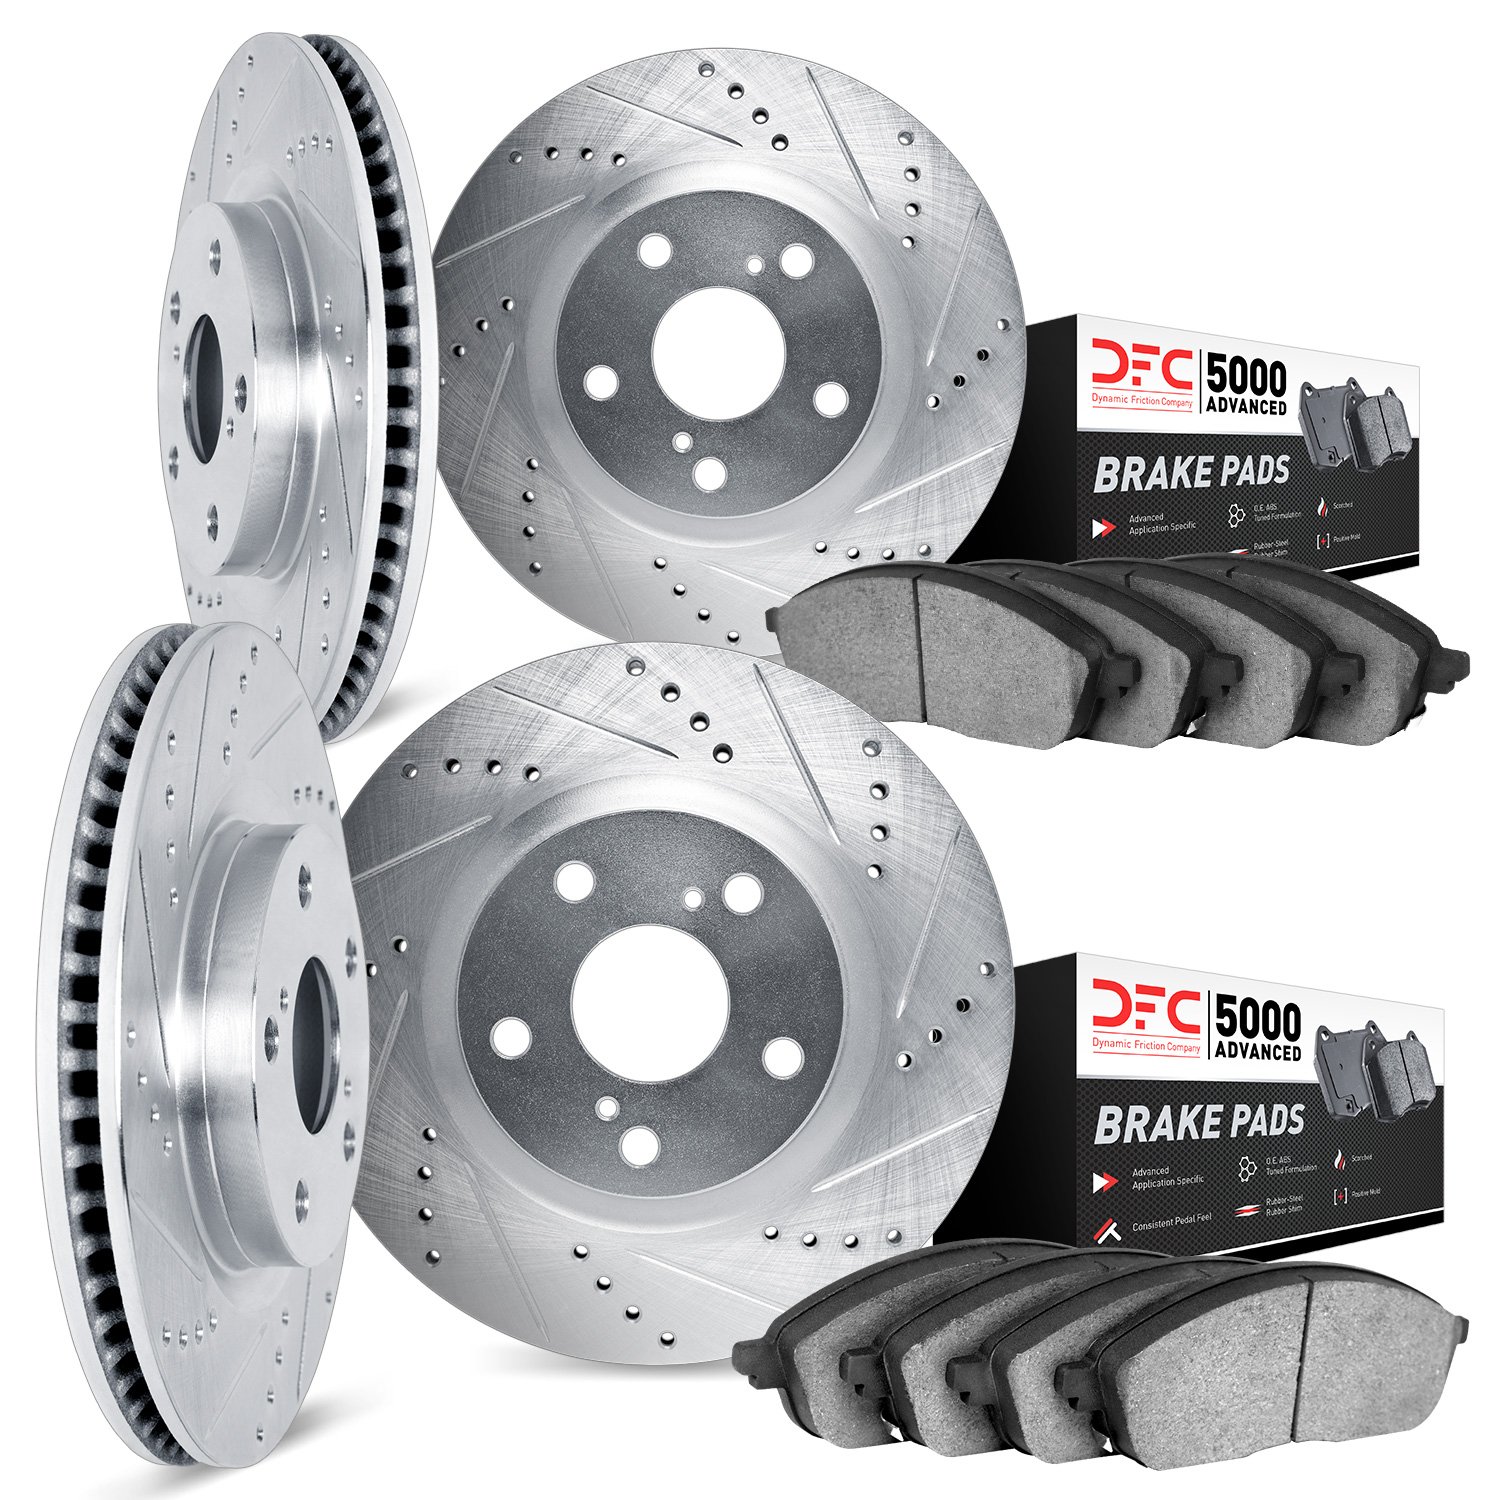 7504-39026 Drilled/Slotted Brake Rotors w/5000 Advanced Brake Pads Kit [Silver], Fits Select Mopar, Position: Front and Rear